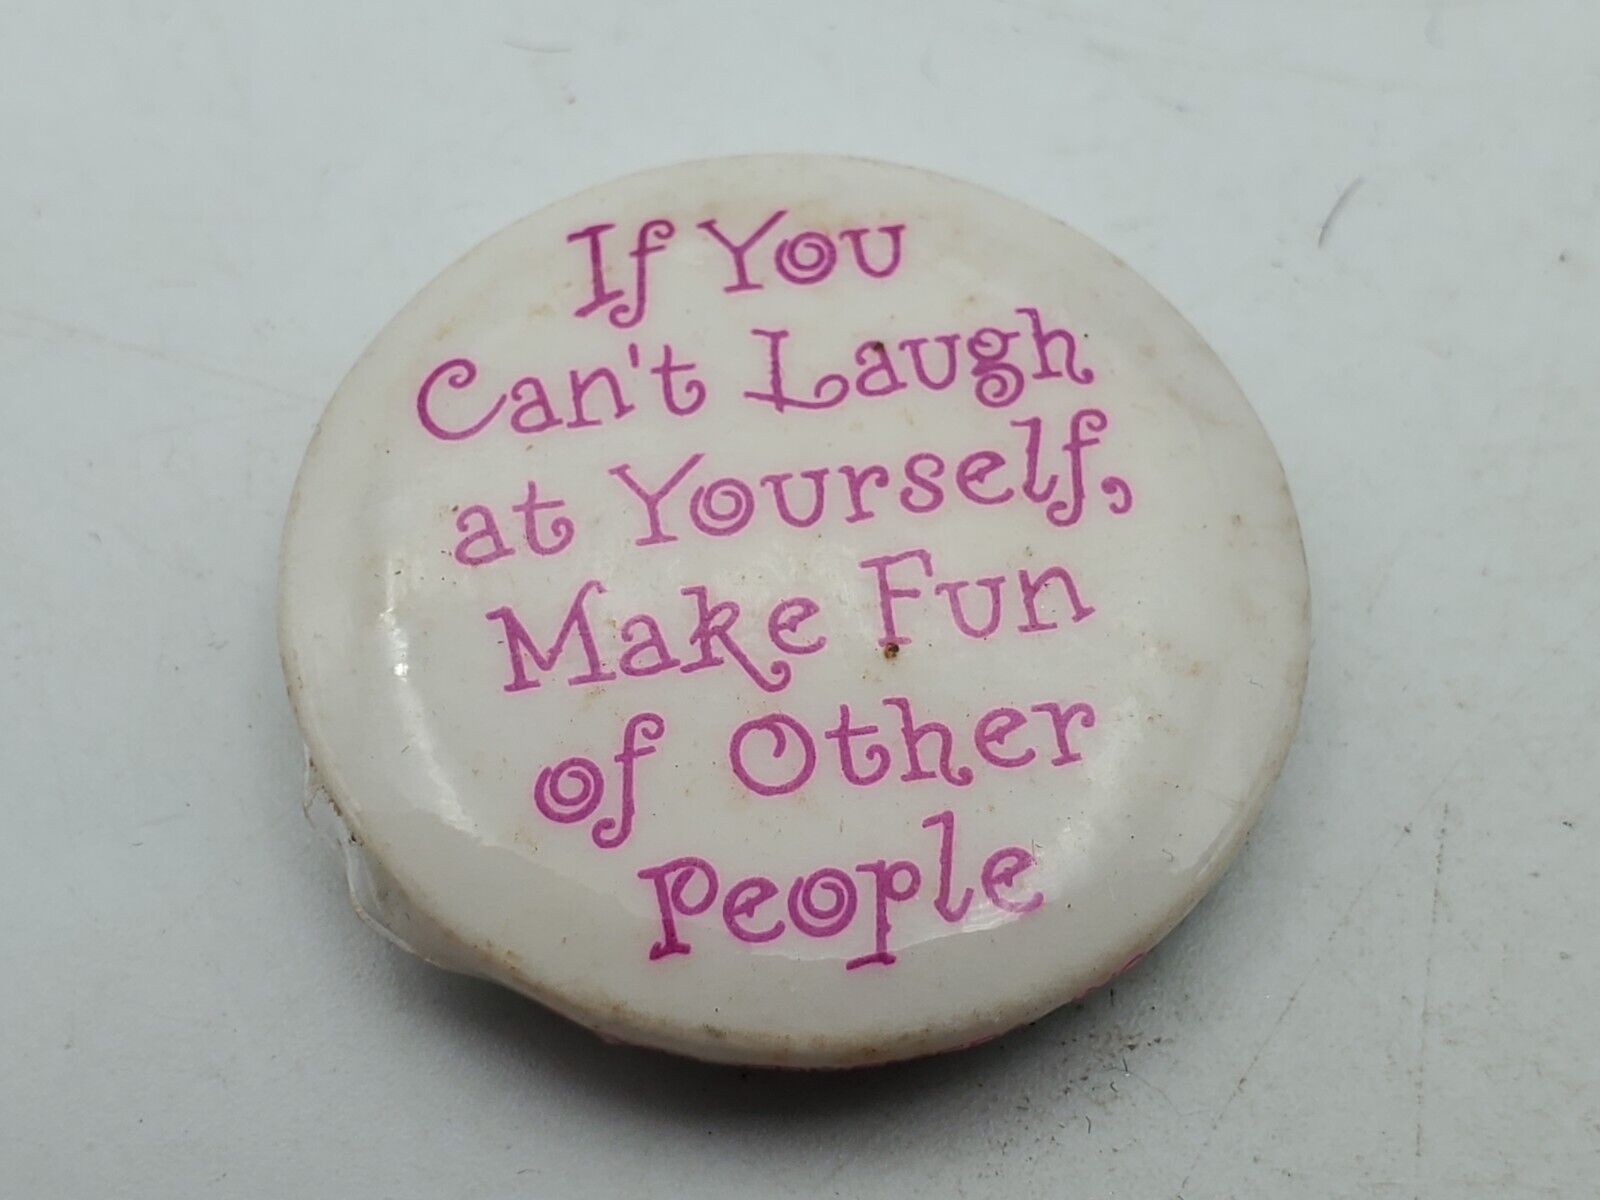 Vtg IF YOU CANT LAUGH AT YOURSELF MAKE FUN OF OTHERS Button PIn Pinback As Is S1